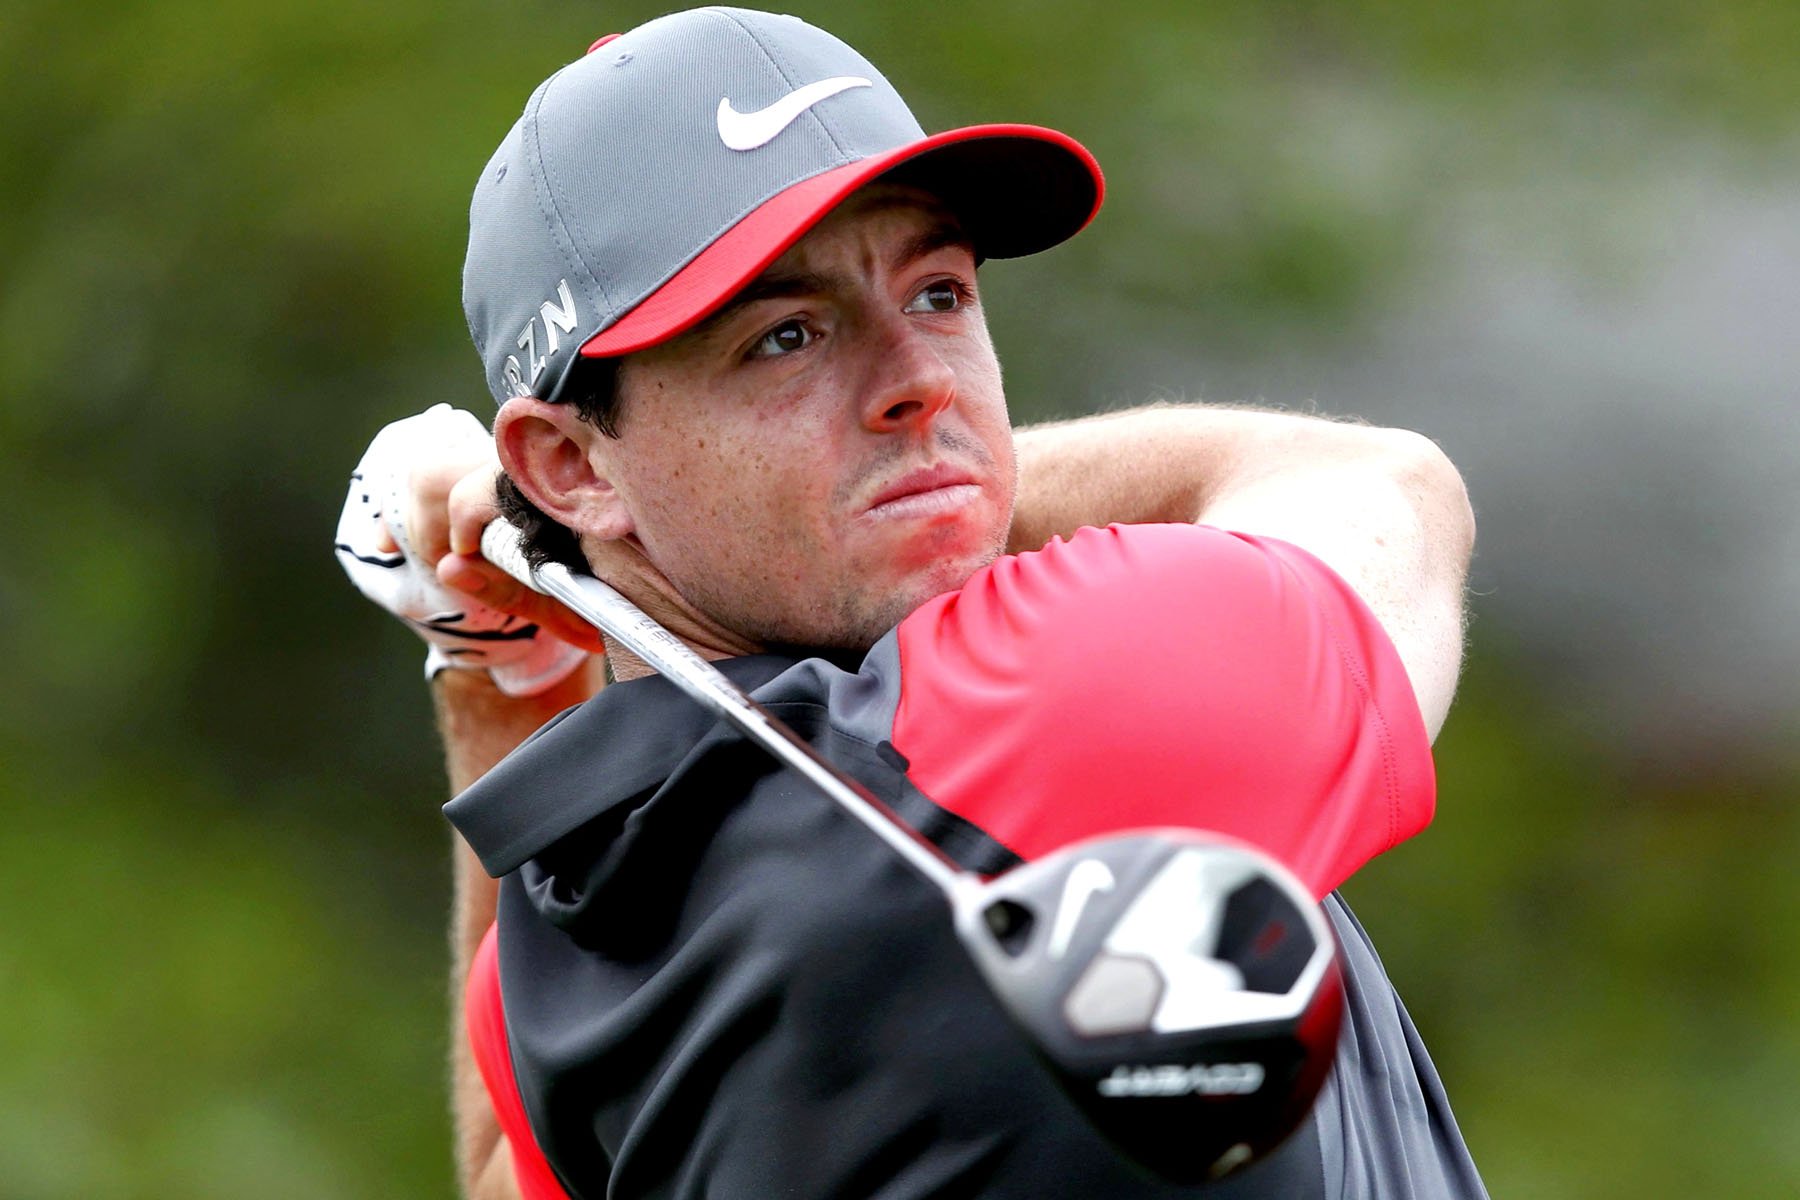  Rory McIlroy charges up US Open leaderboard but leaves it too late